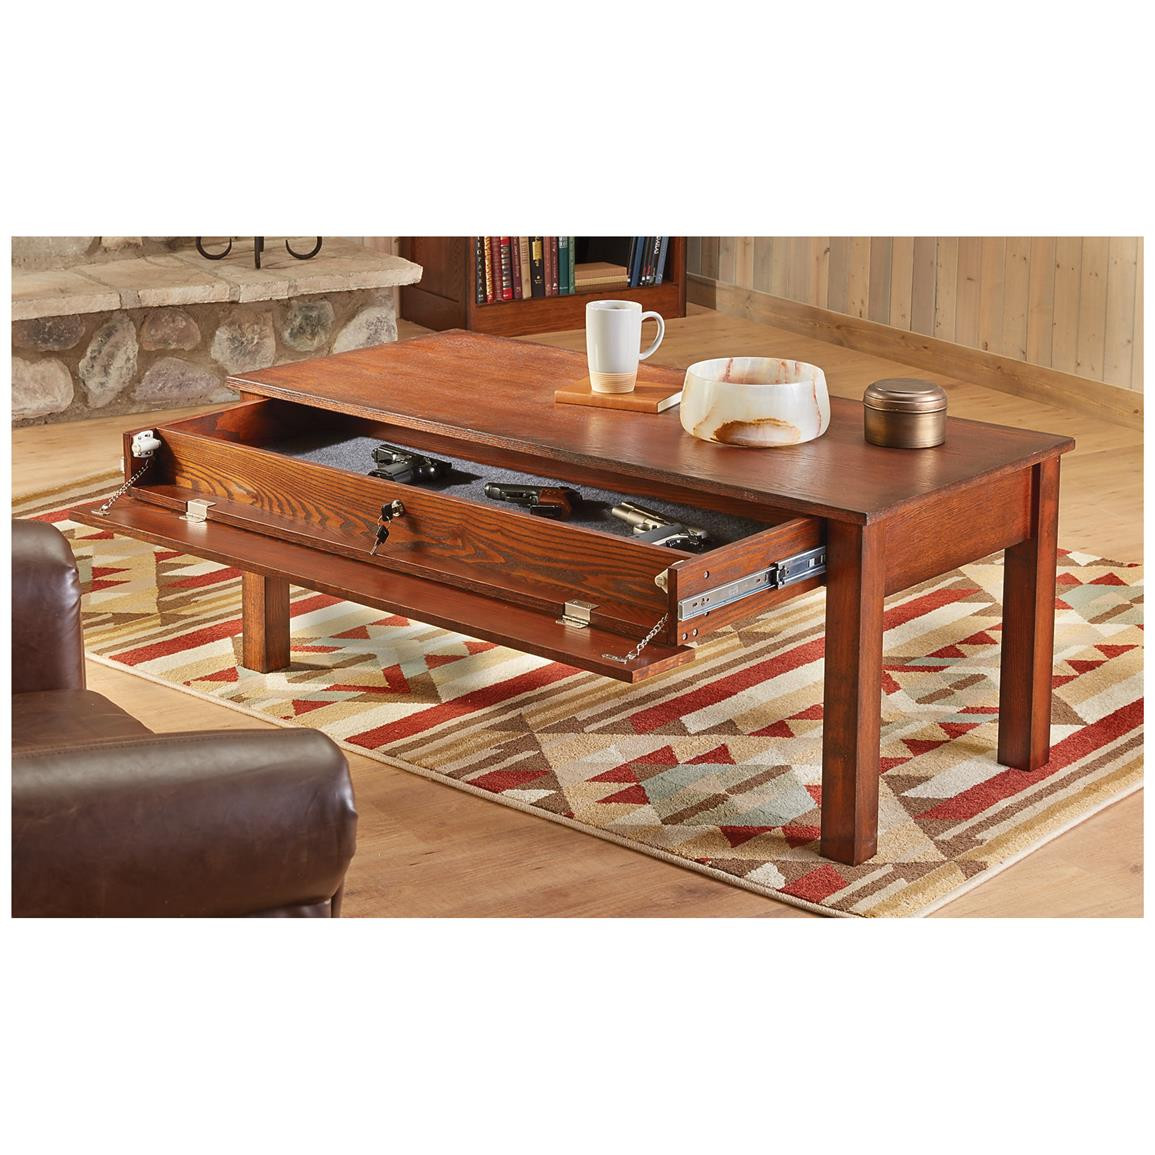 Best ideas about DIY Concealment Furniture
. Save or Pin CASTLECREEK Gun Concealment Coffee Table Living Now.